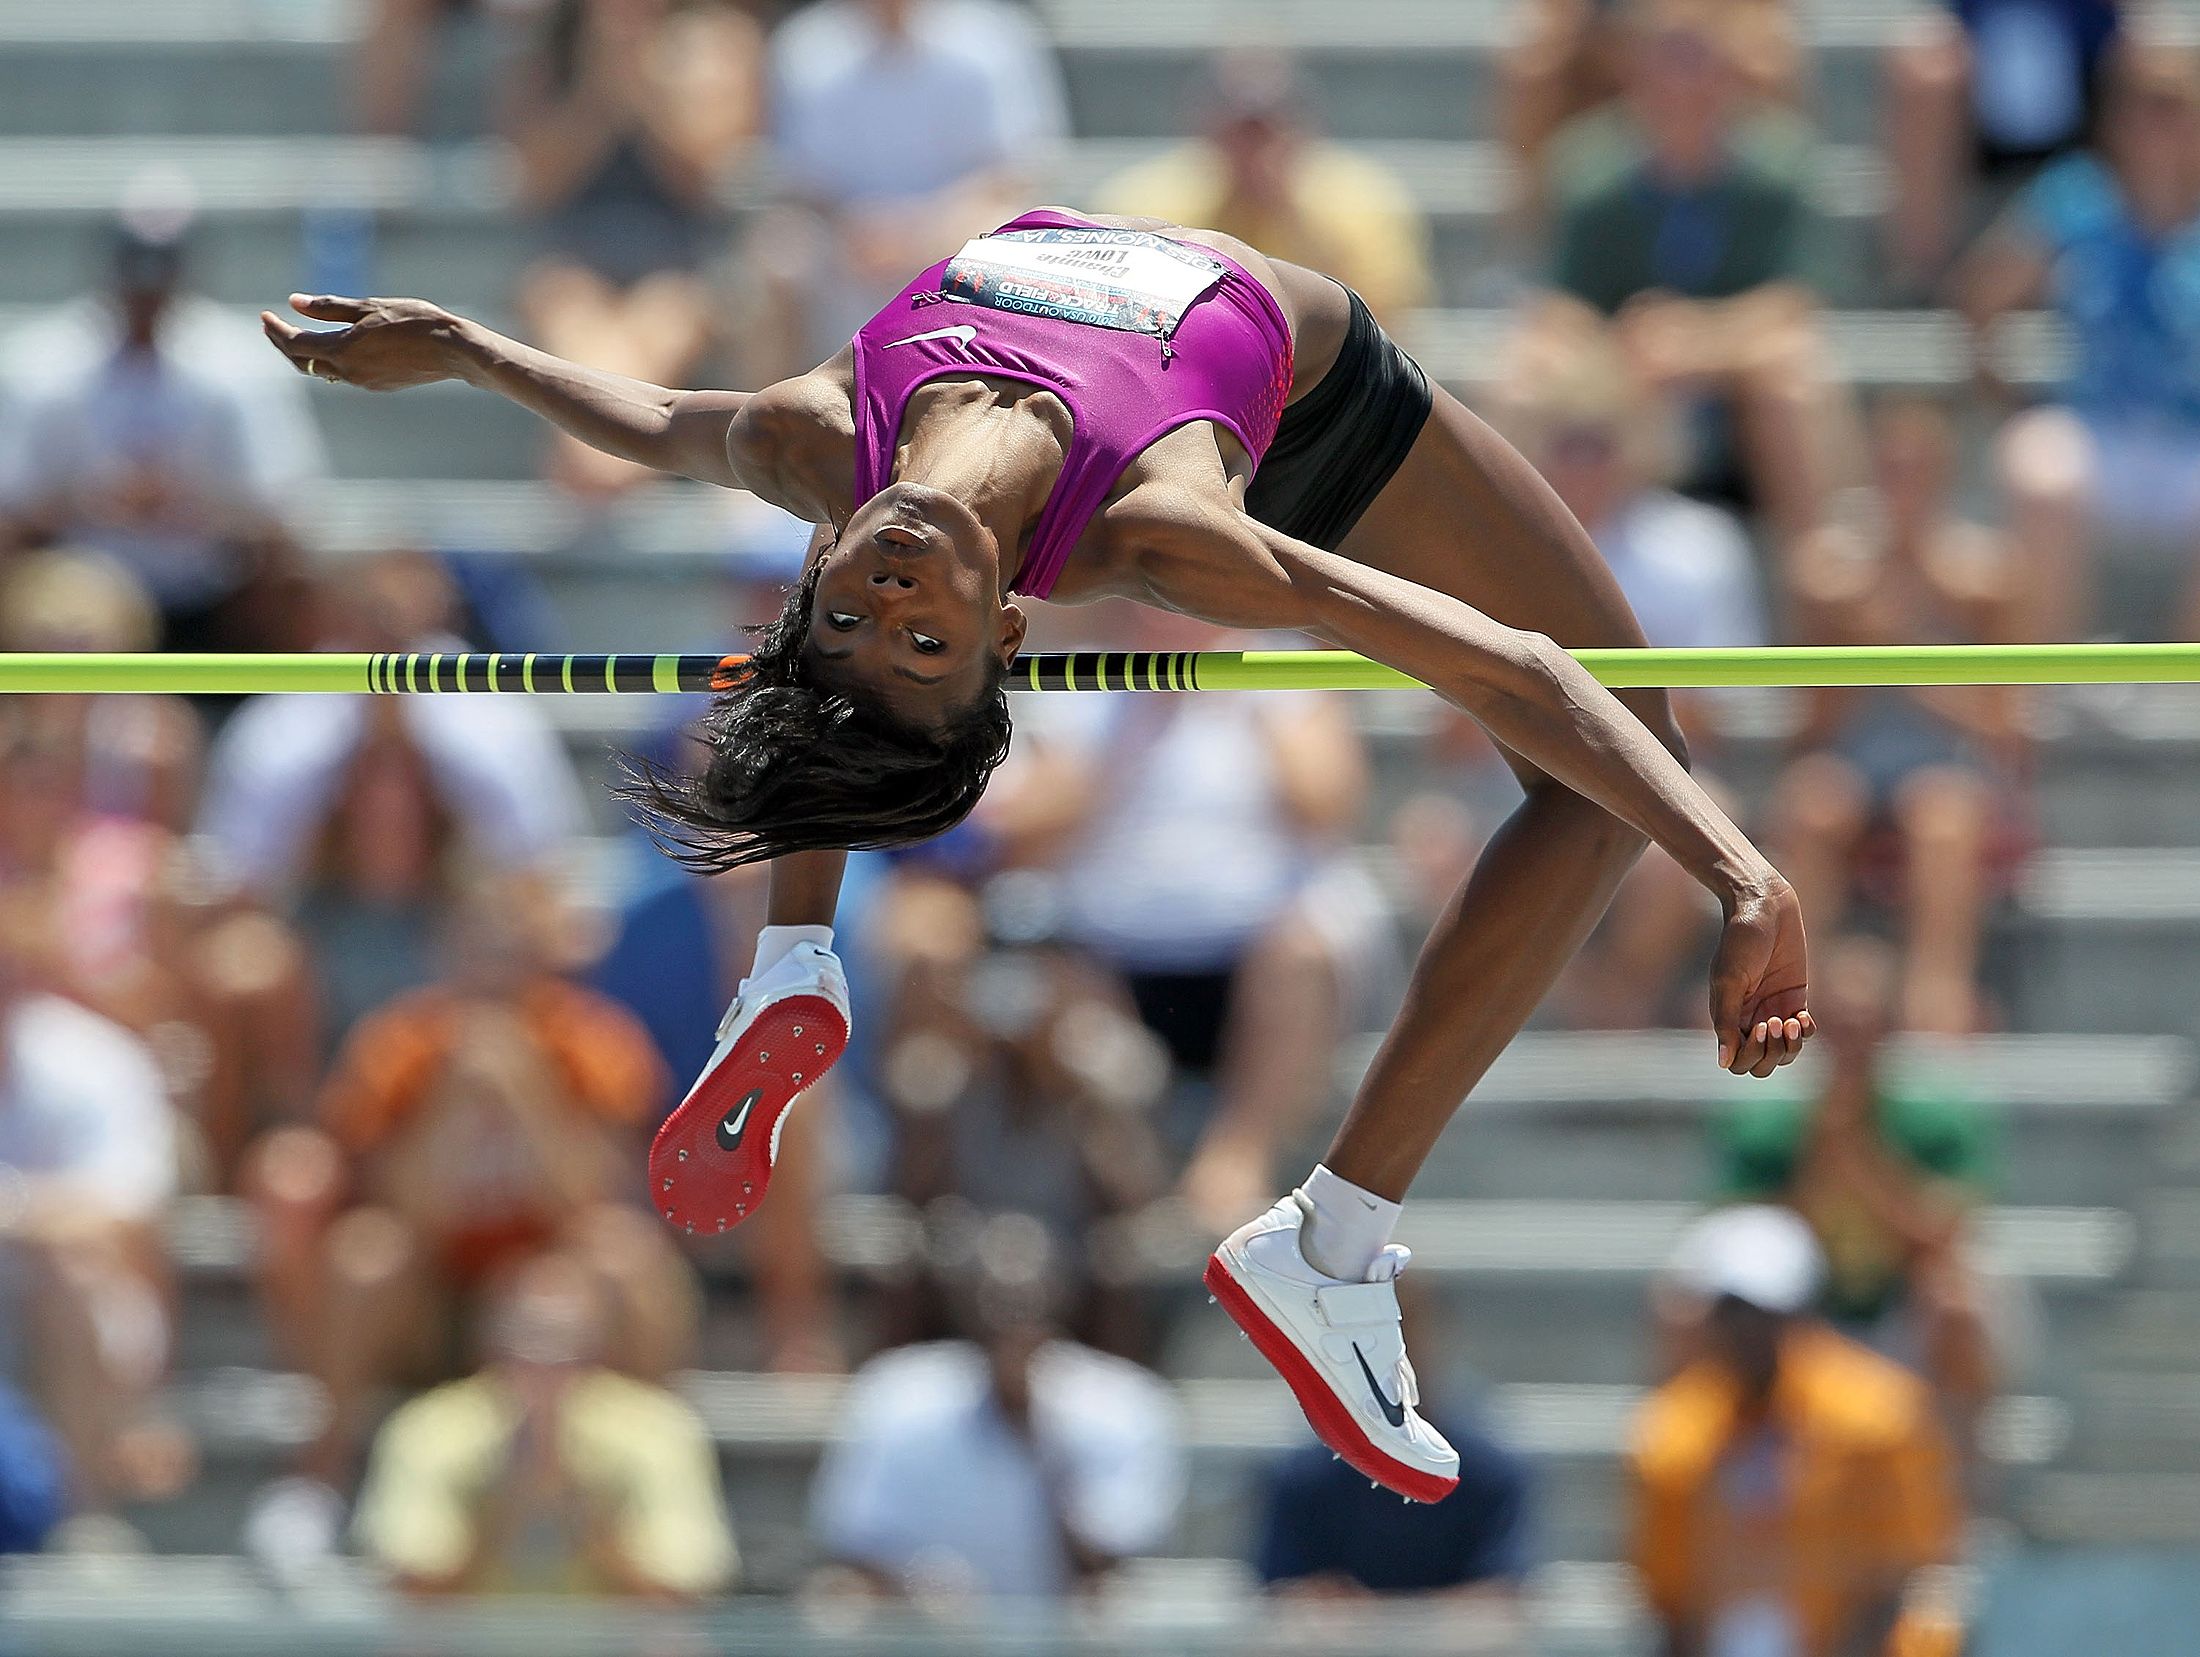 Chaunte Lowe at the 2010 US Championships